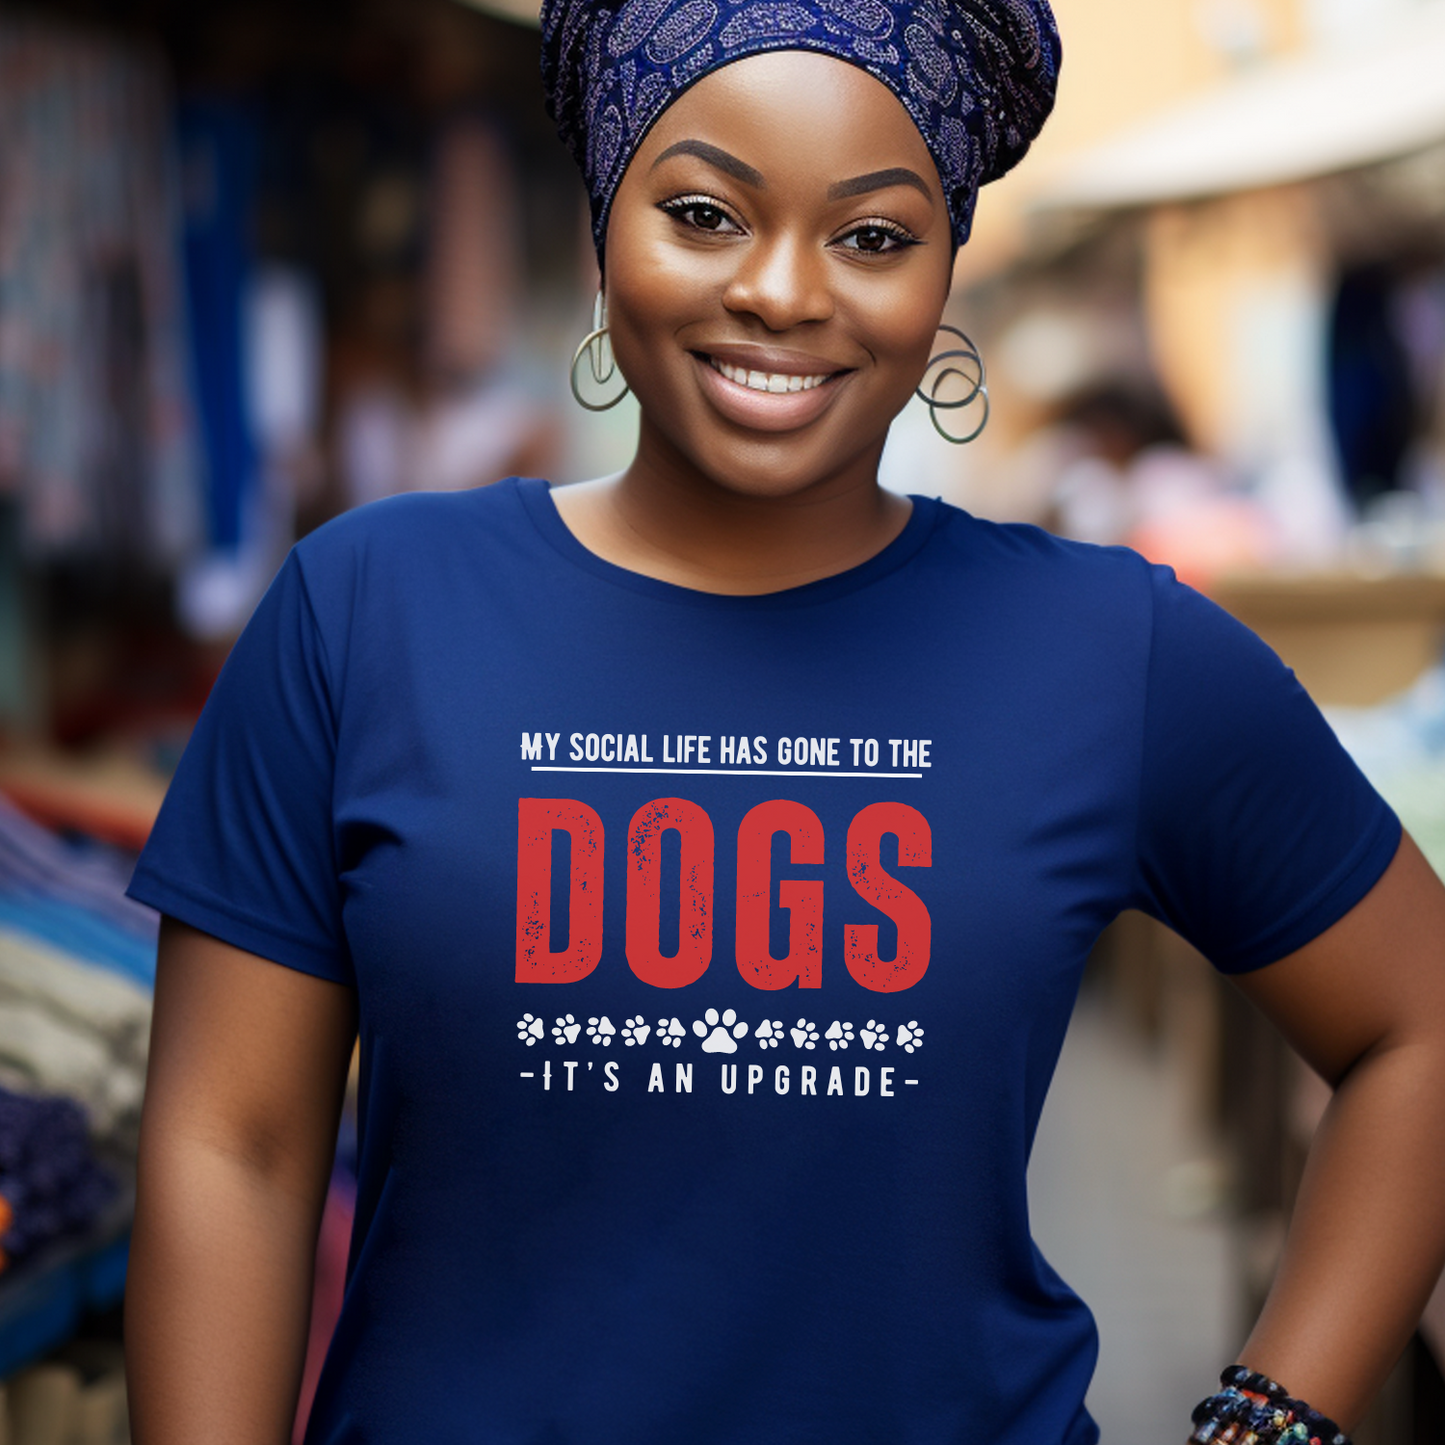 My Social Life Has Gone to the Dogs Bella Canvas 3001 Unisex Tee